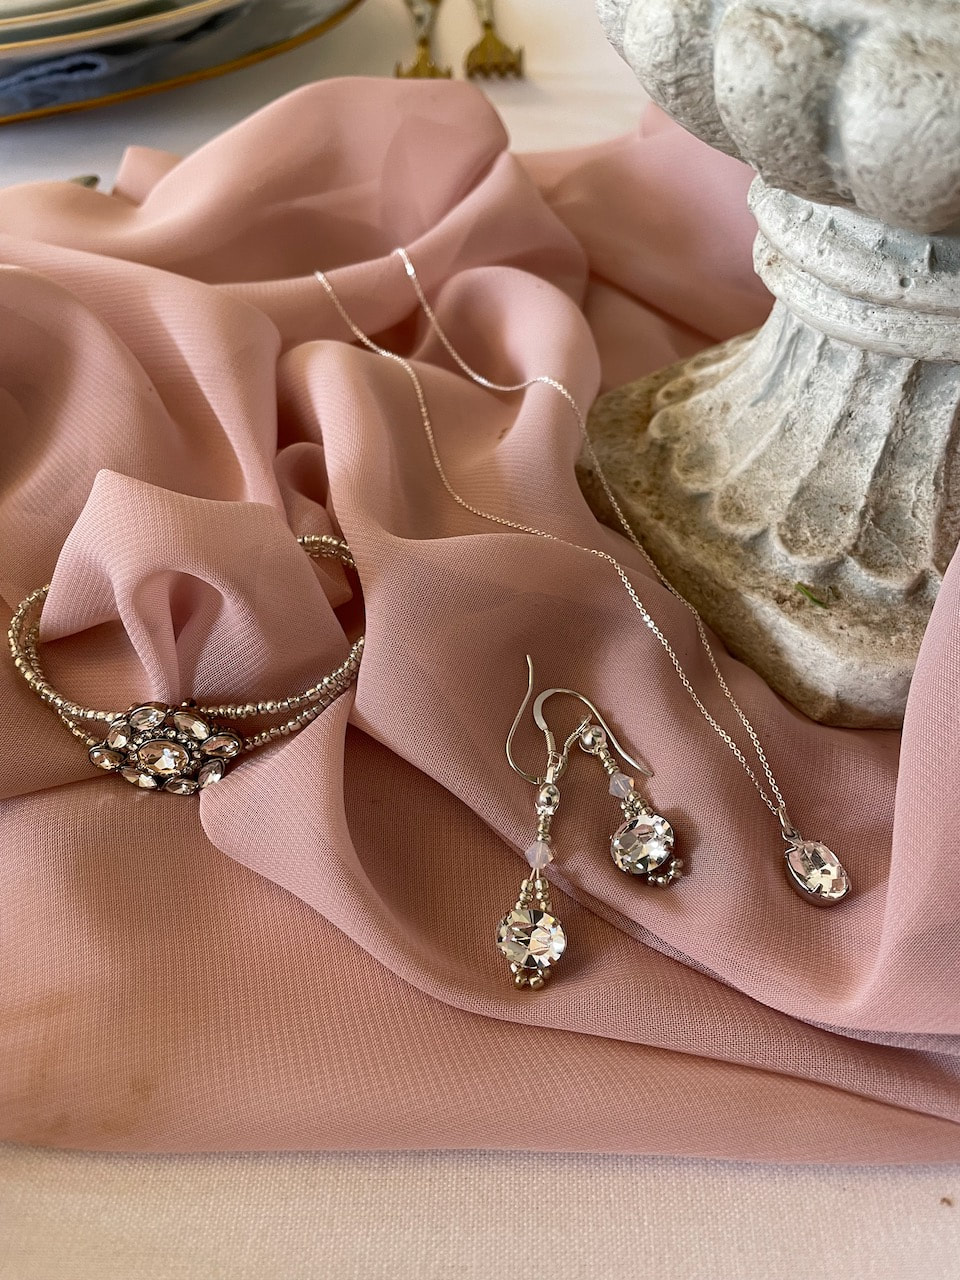 Sparkly earrings, necklace and bracelet for a wedding day on dusky pink blush  material